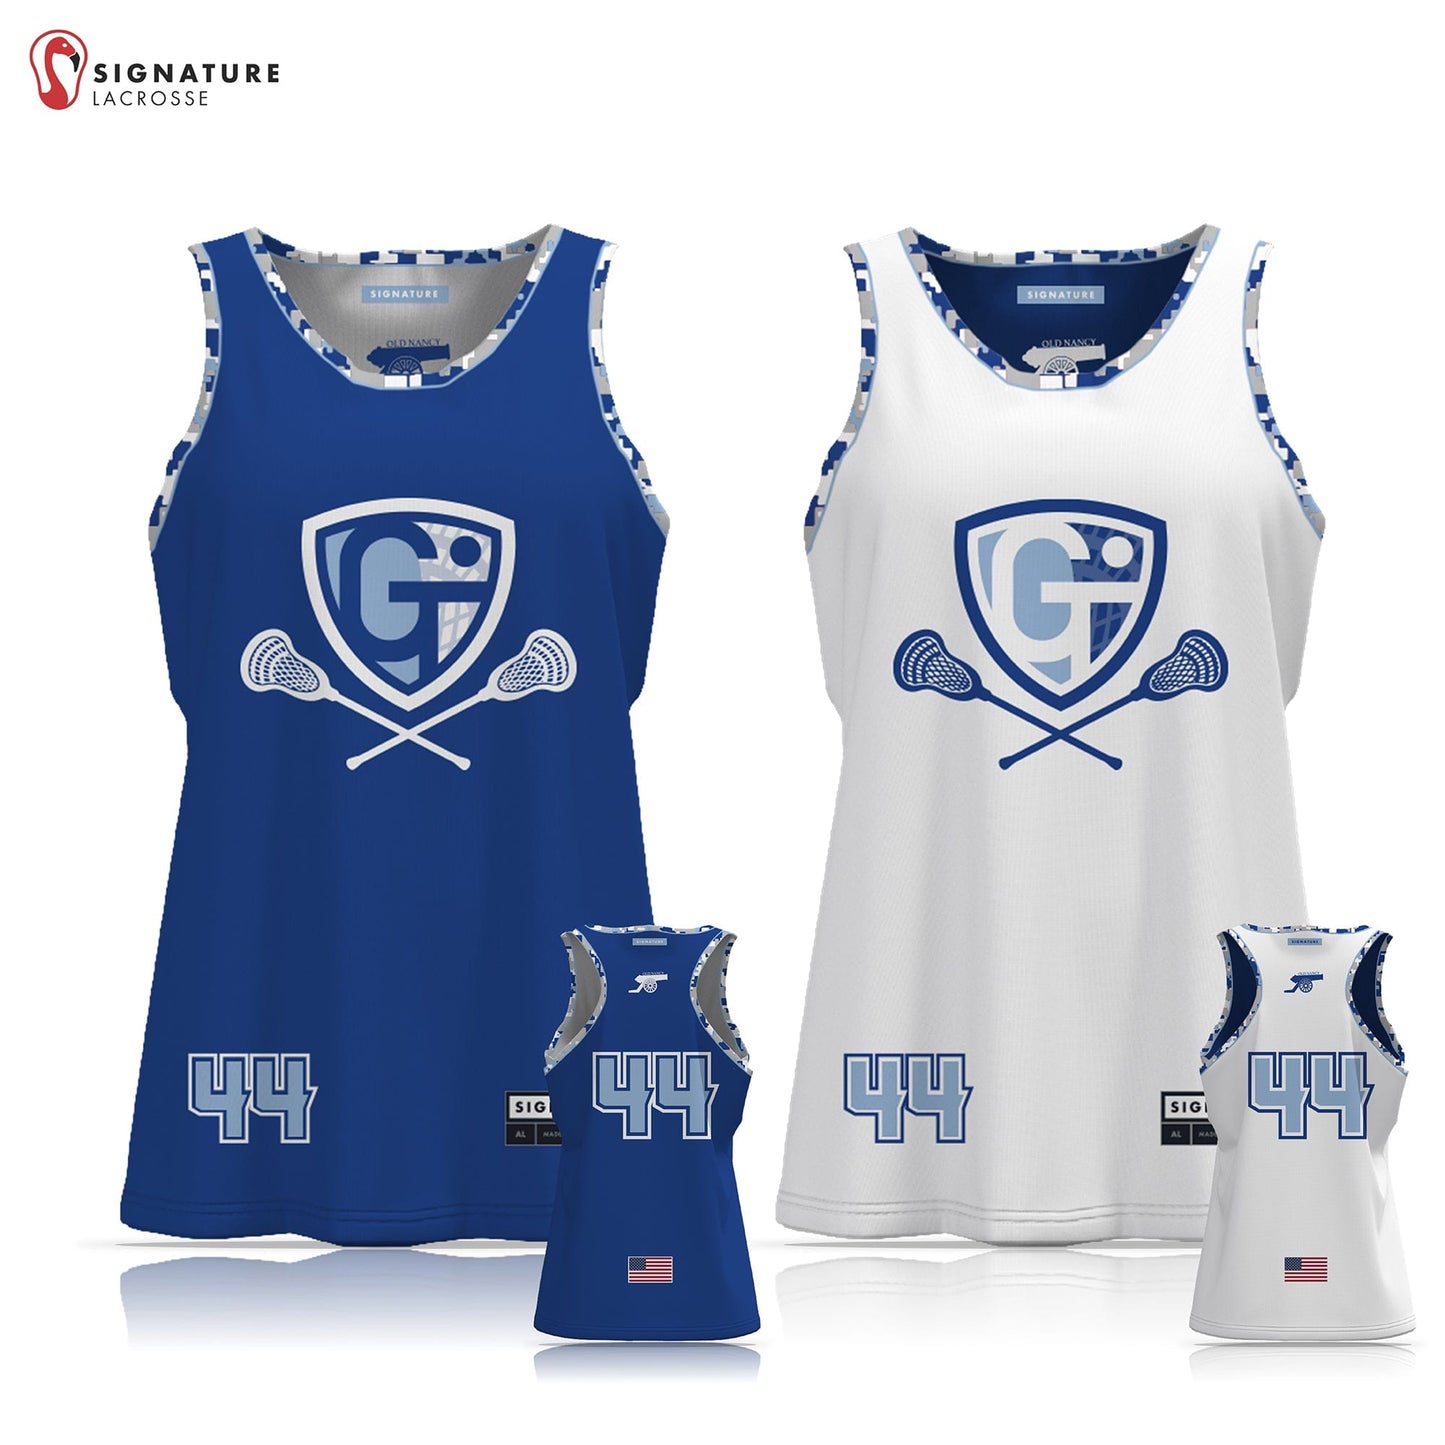 Georgetown-Triton Youth Lacrosse Women's Player Reversible Game Pinnie: 5-6 Signature Lacrosse